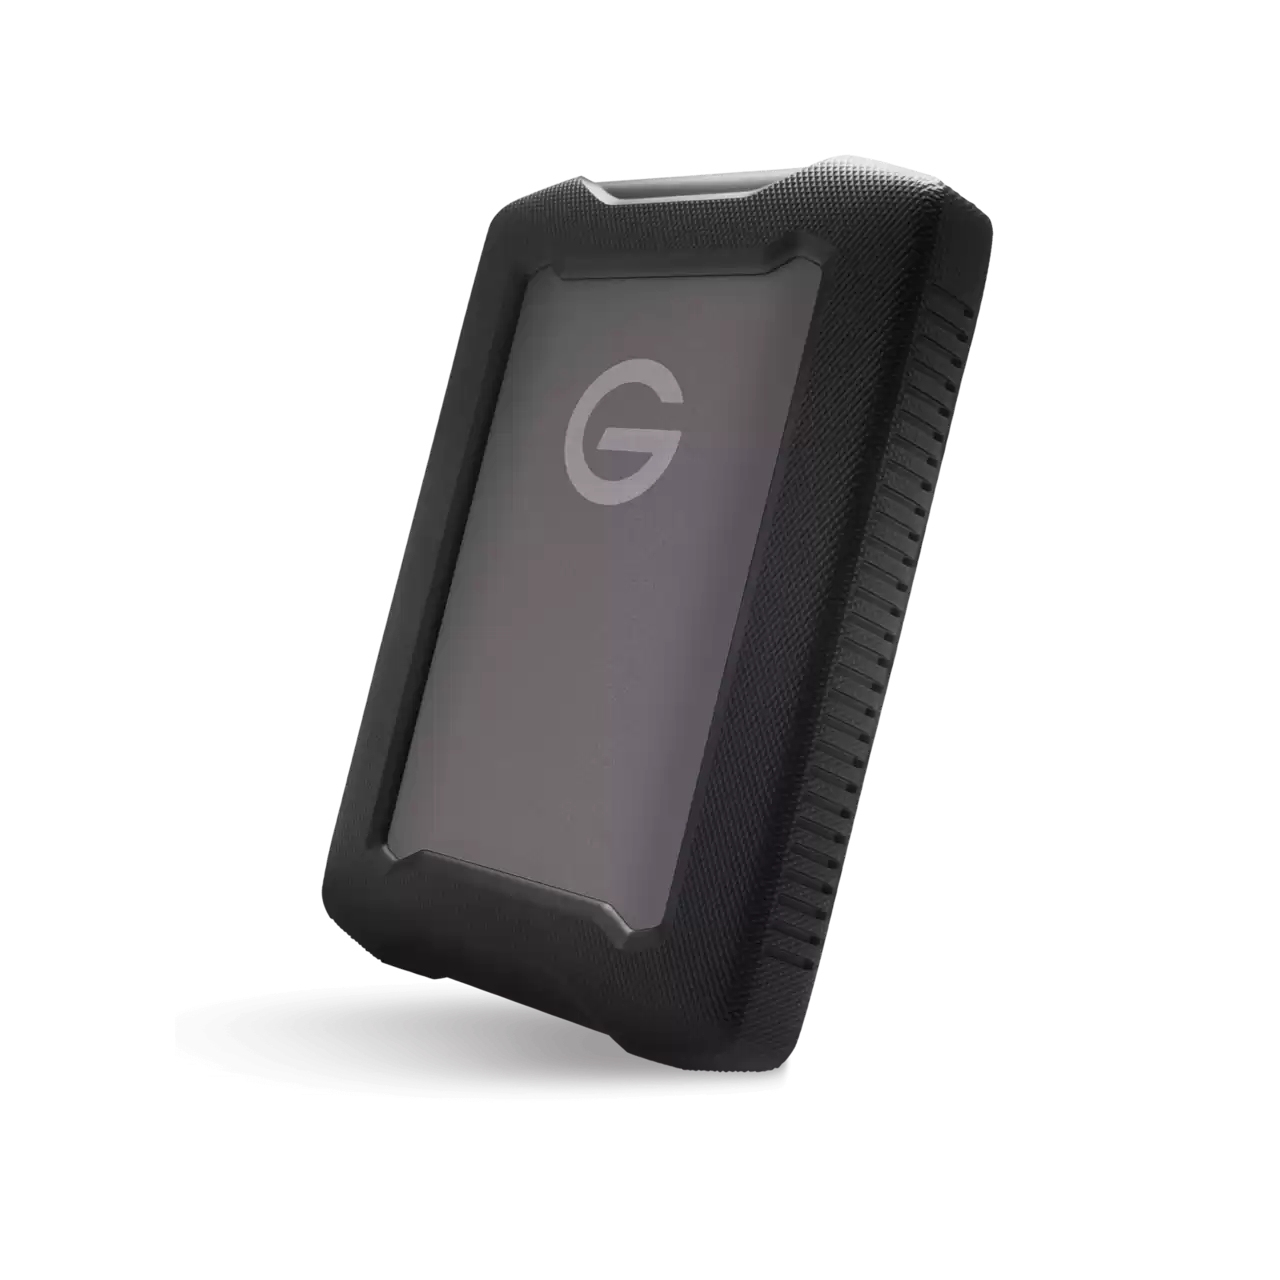  Professional G-DRIVE ArmorATD 1TB 2.5inch 140MB/s USB-C 5Gbps USB 3.2 Gen 1 Rugged portable external HDD - Space Grey